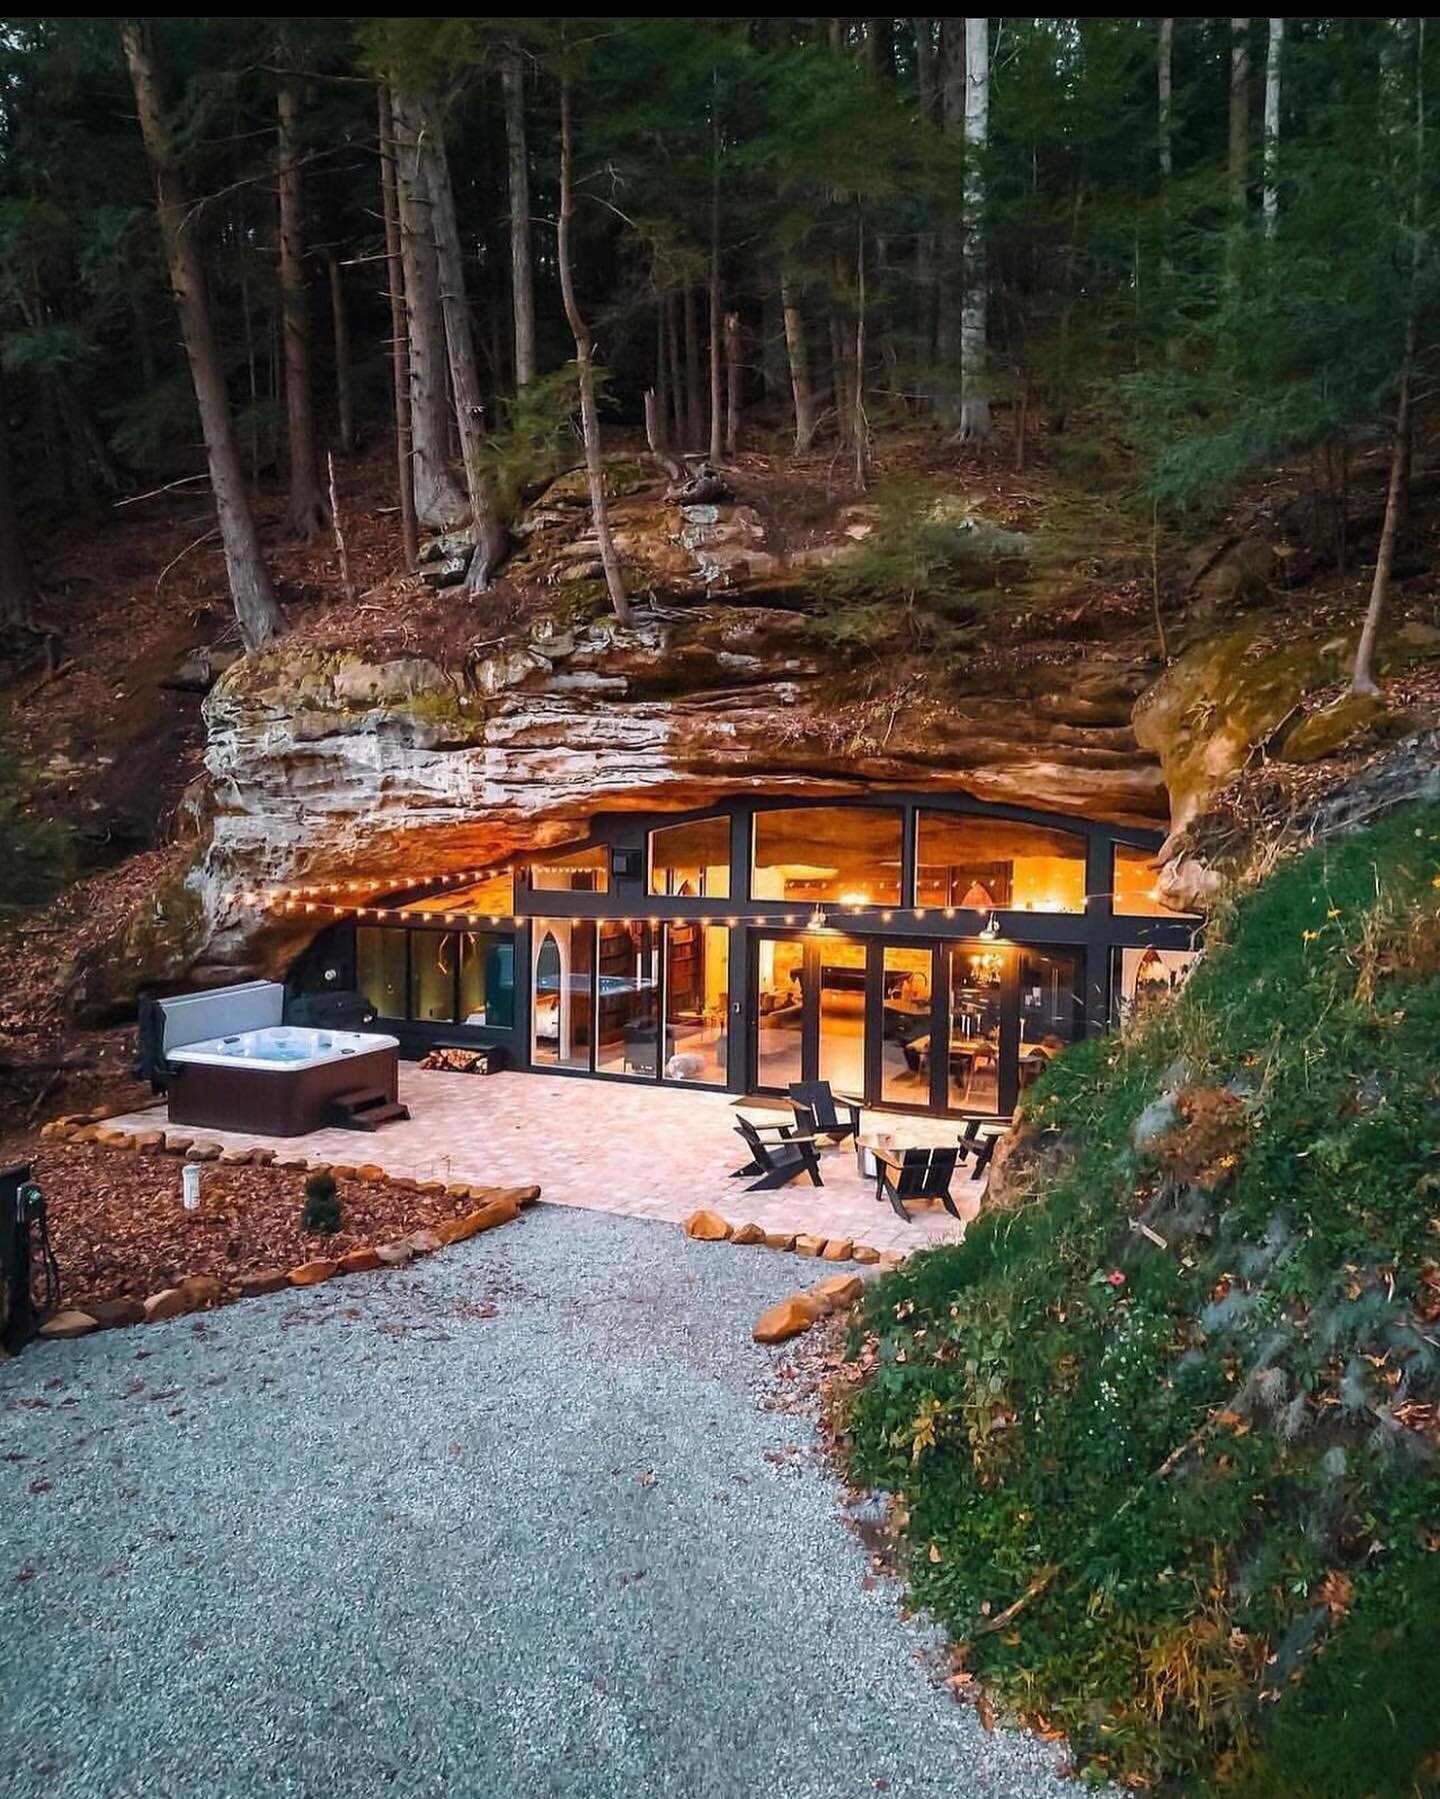 Check out this incredibly unique vacation spot from @dunlaphollowcabins!! Holy cow! Never seen anything like it! That rough stone ceiling coupled with the excellent furniture choices make this one of my favorite spots I&rsquo;ve ever seen! Bucket lis